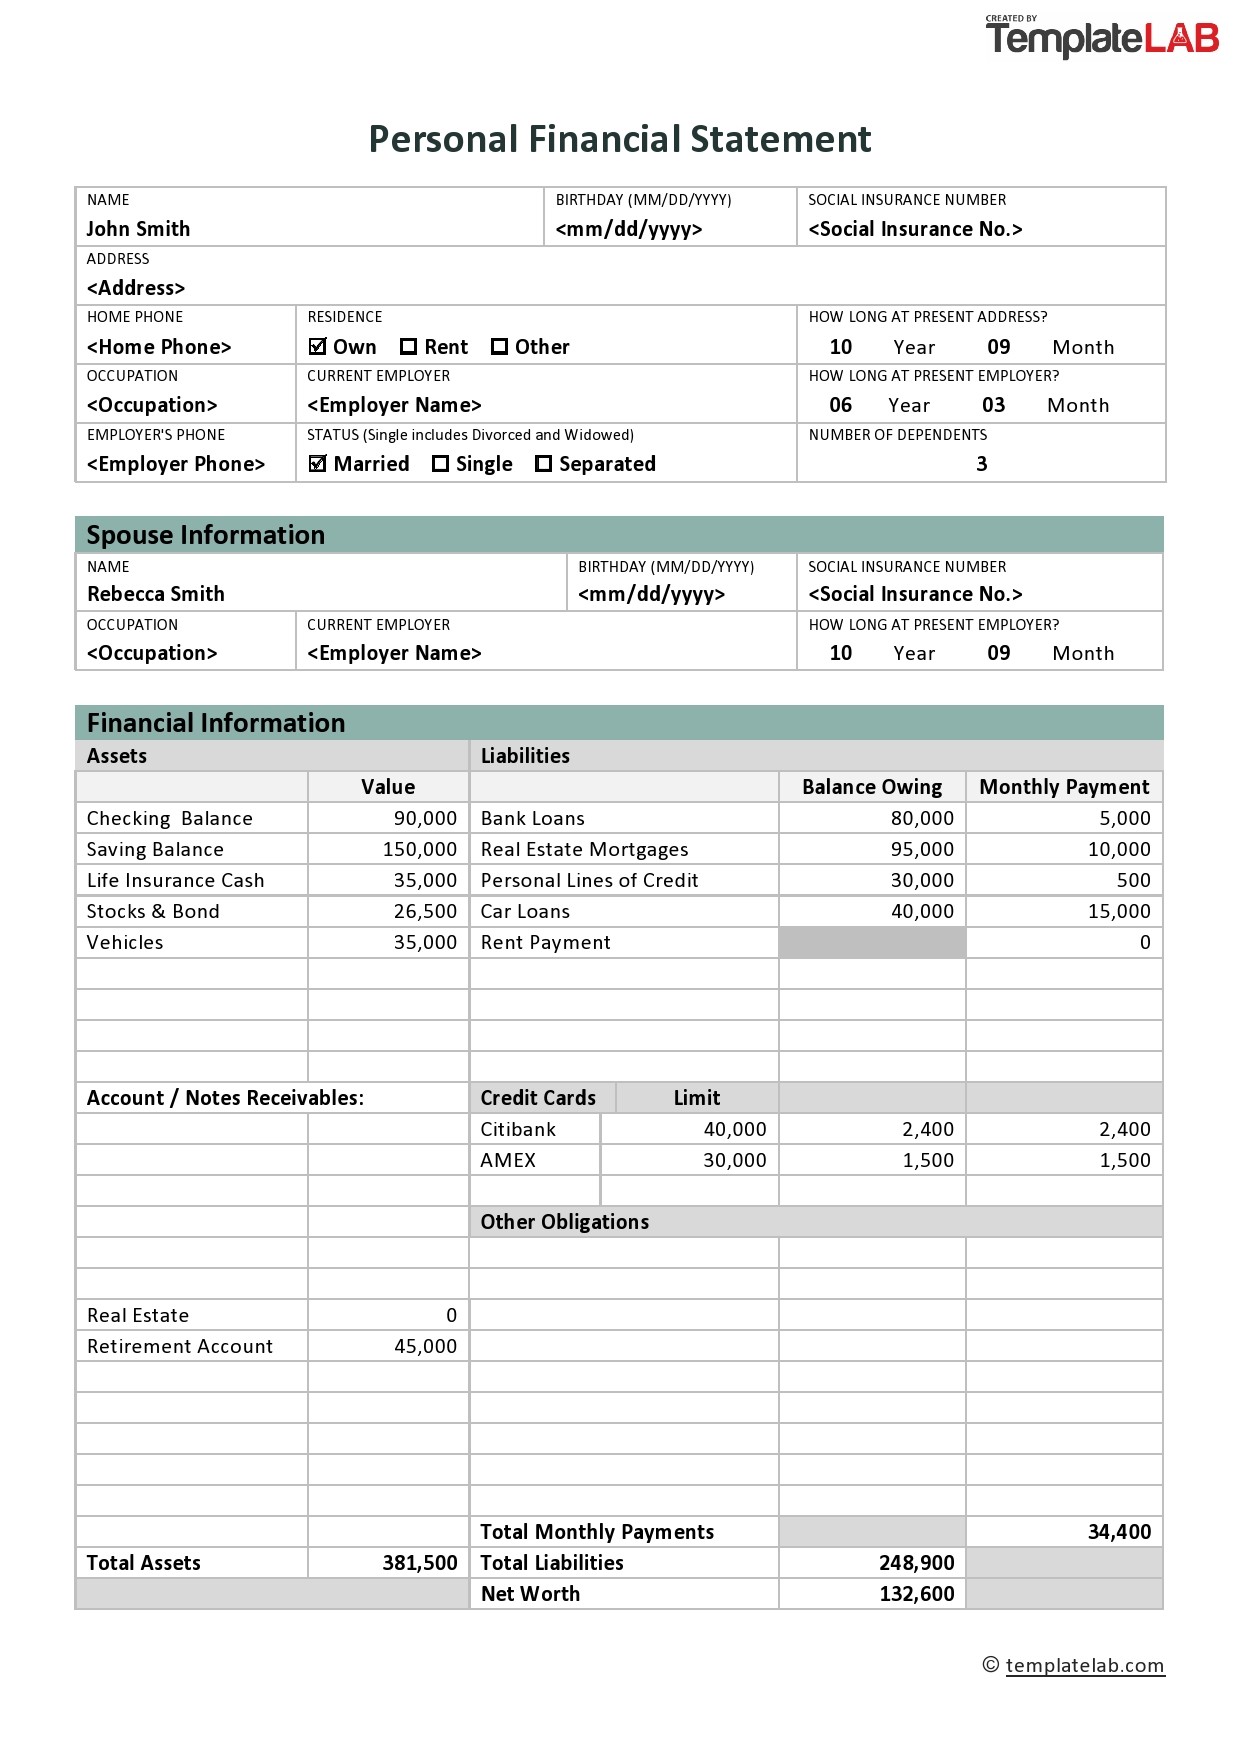 Personal Finance Statement Template